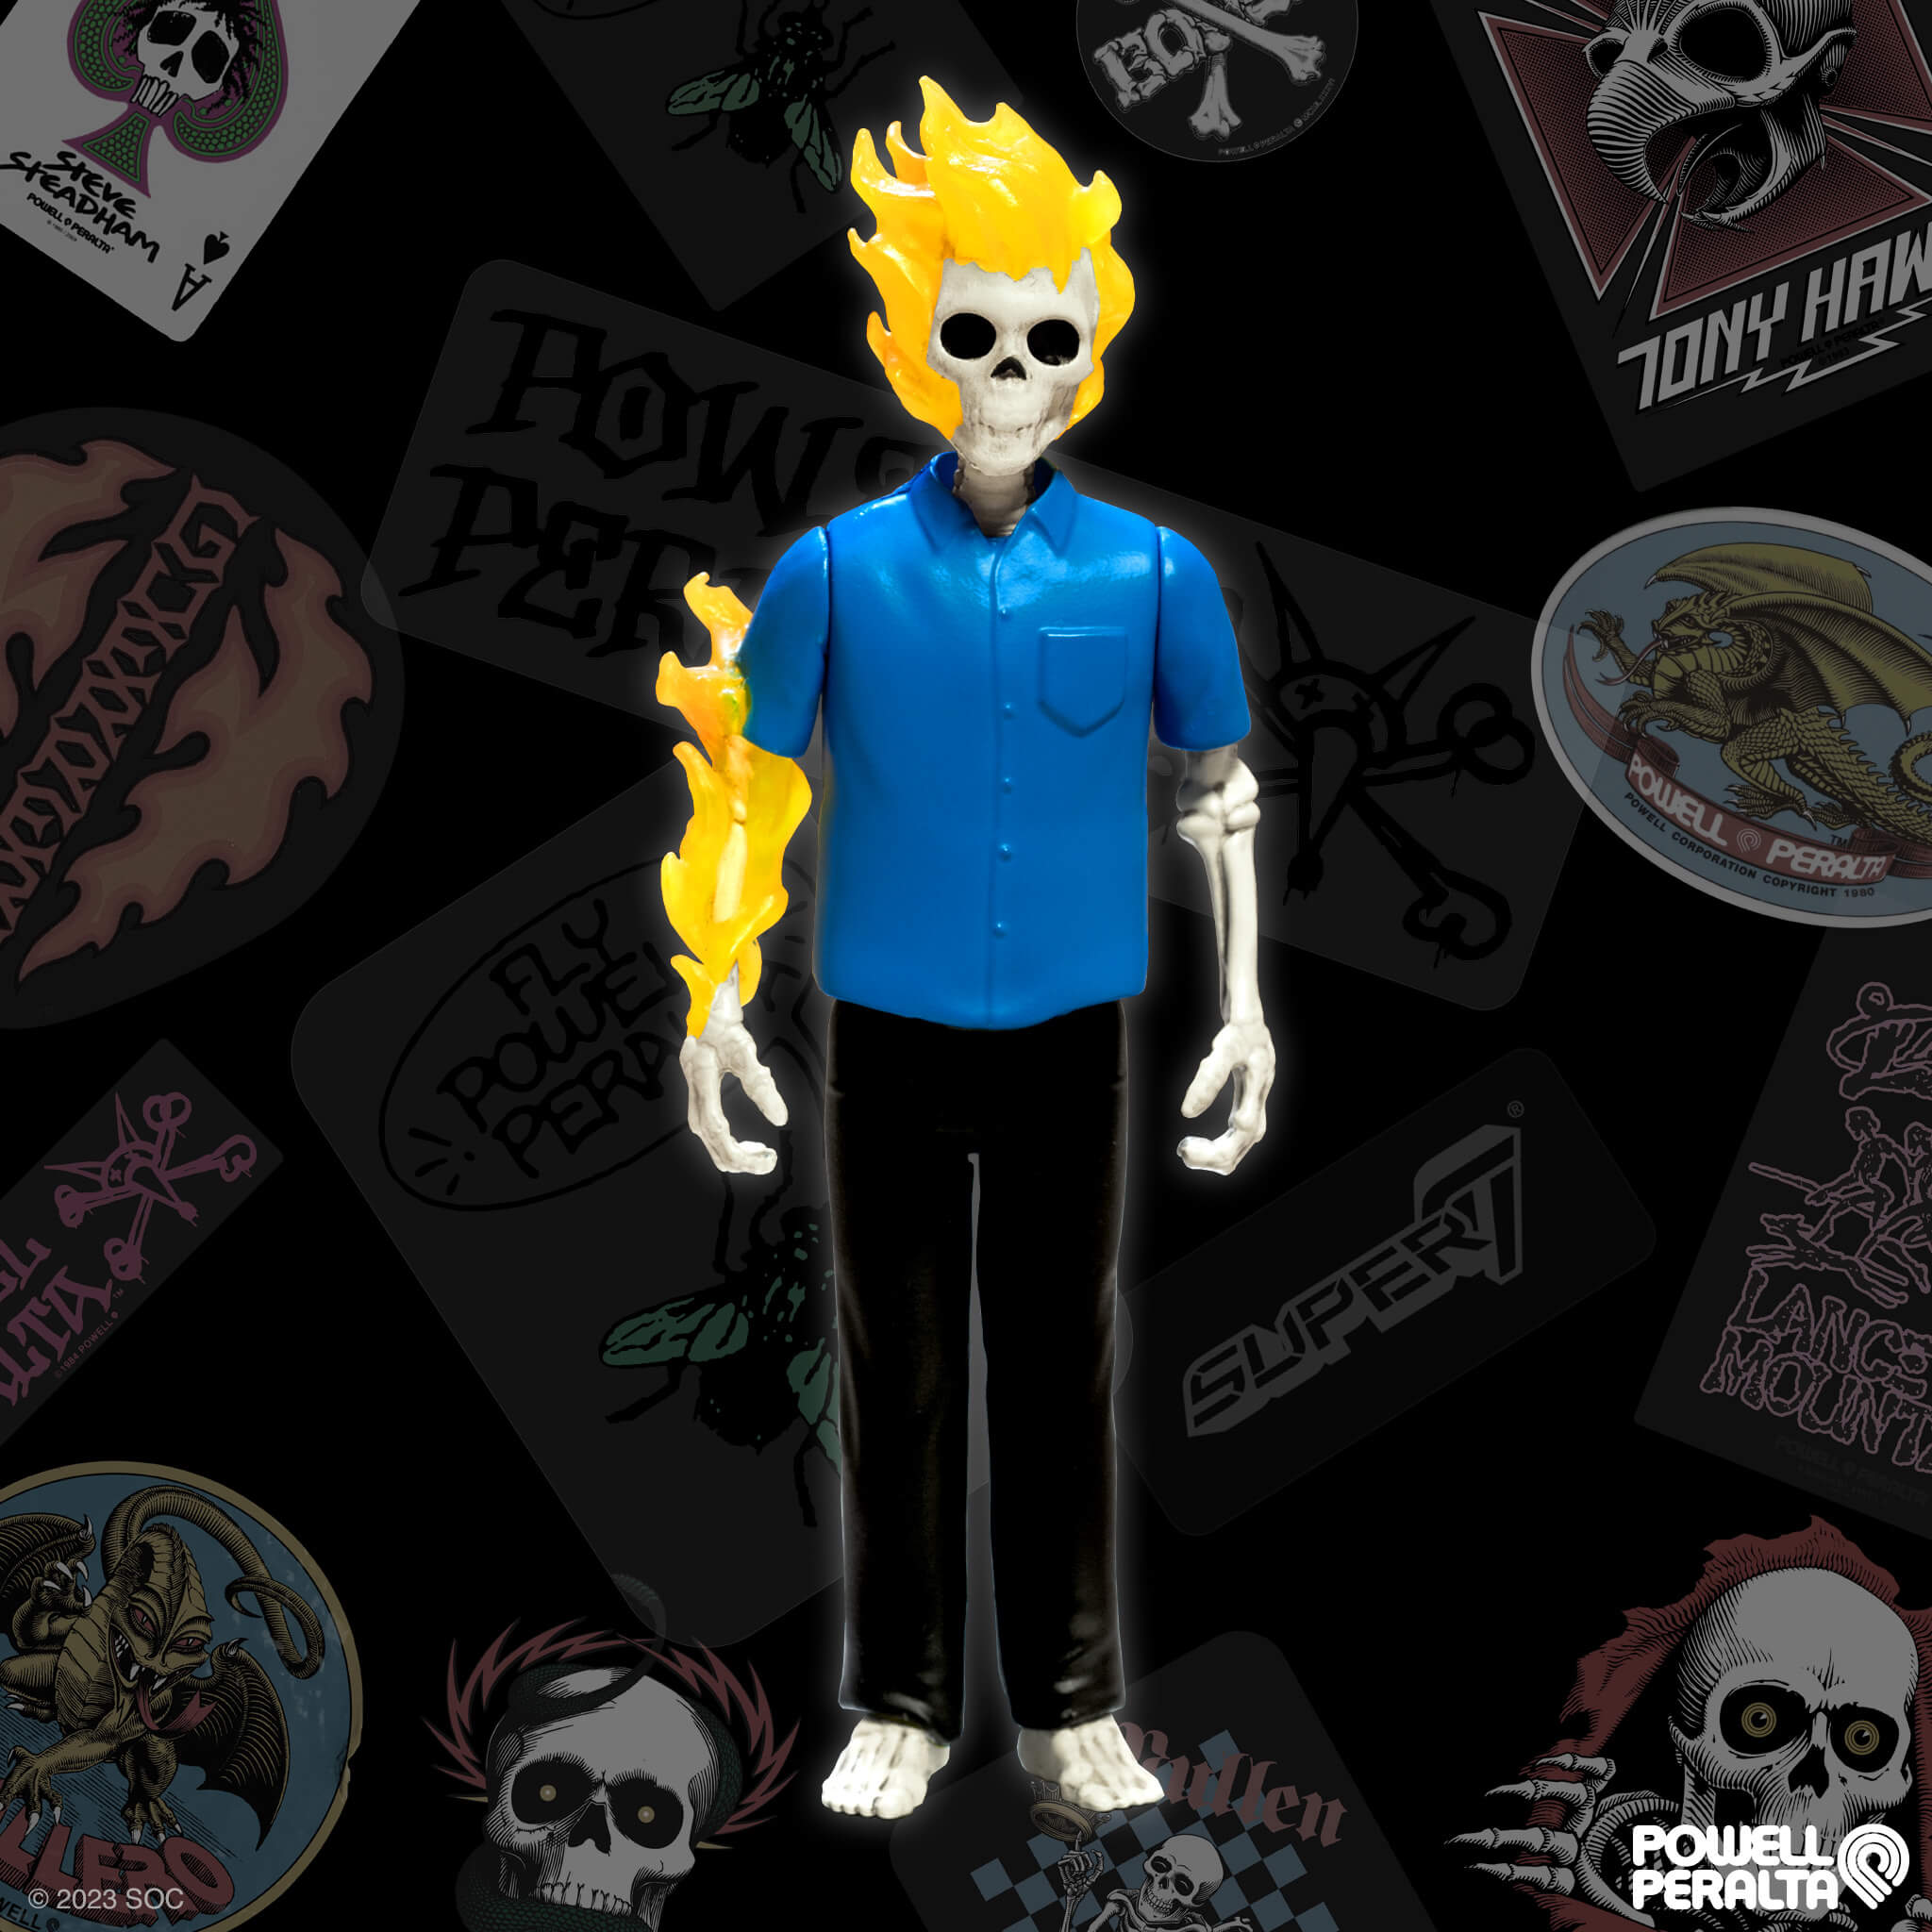 Powell-Peralta ReAction Figure Wave 1 - Tommy Guerrero Flaming Dagger